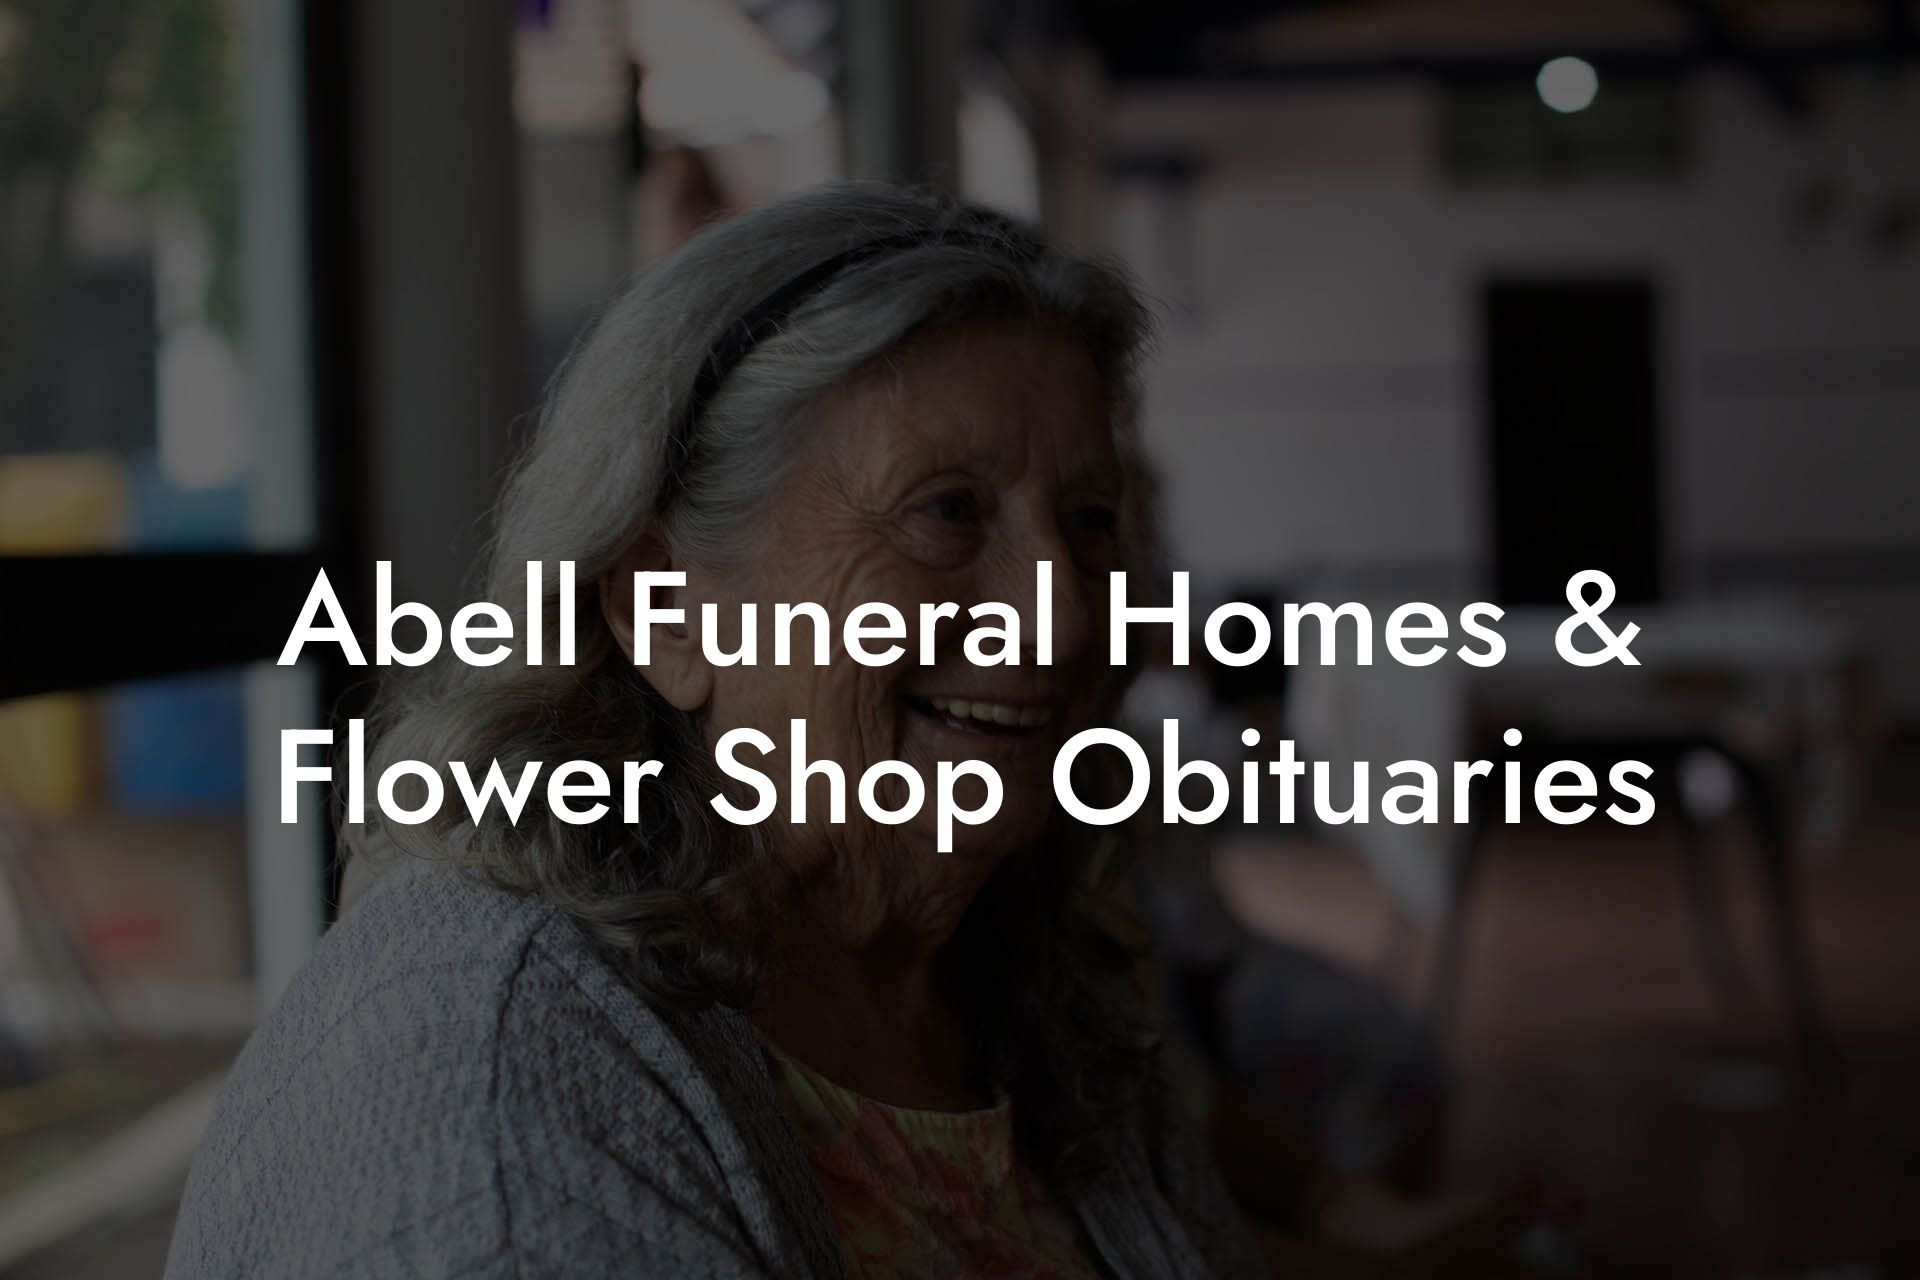 Abell Funeral Homes & Flower Shop Obituaries